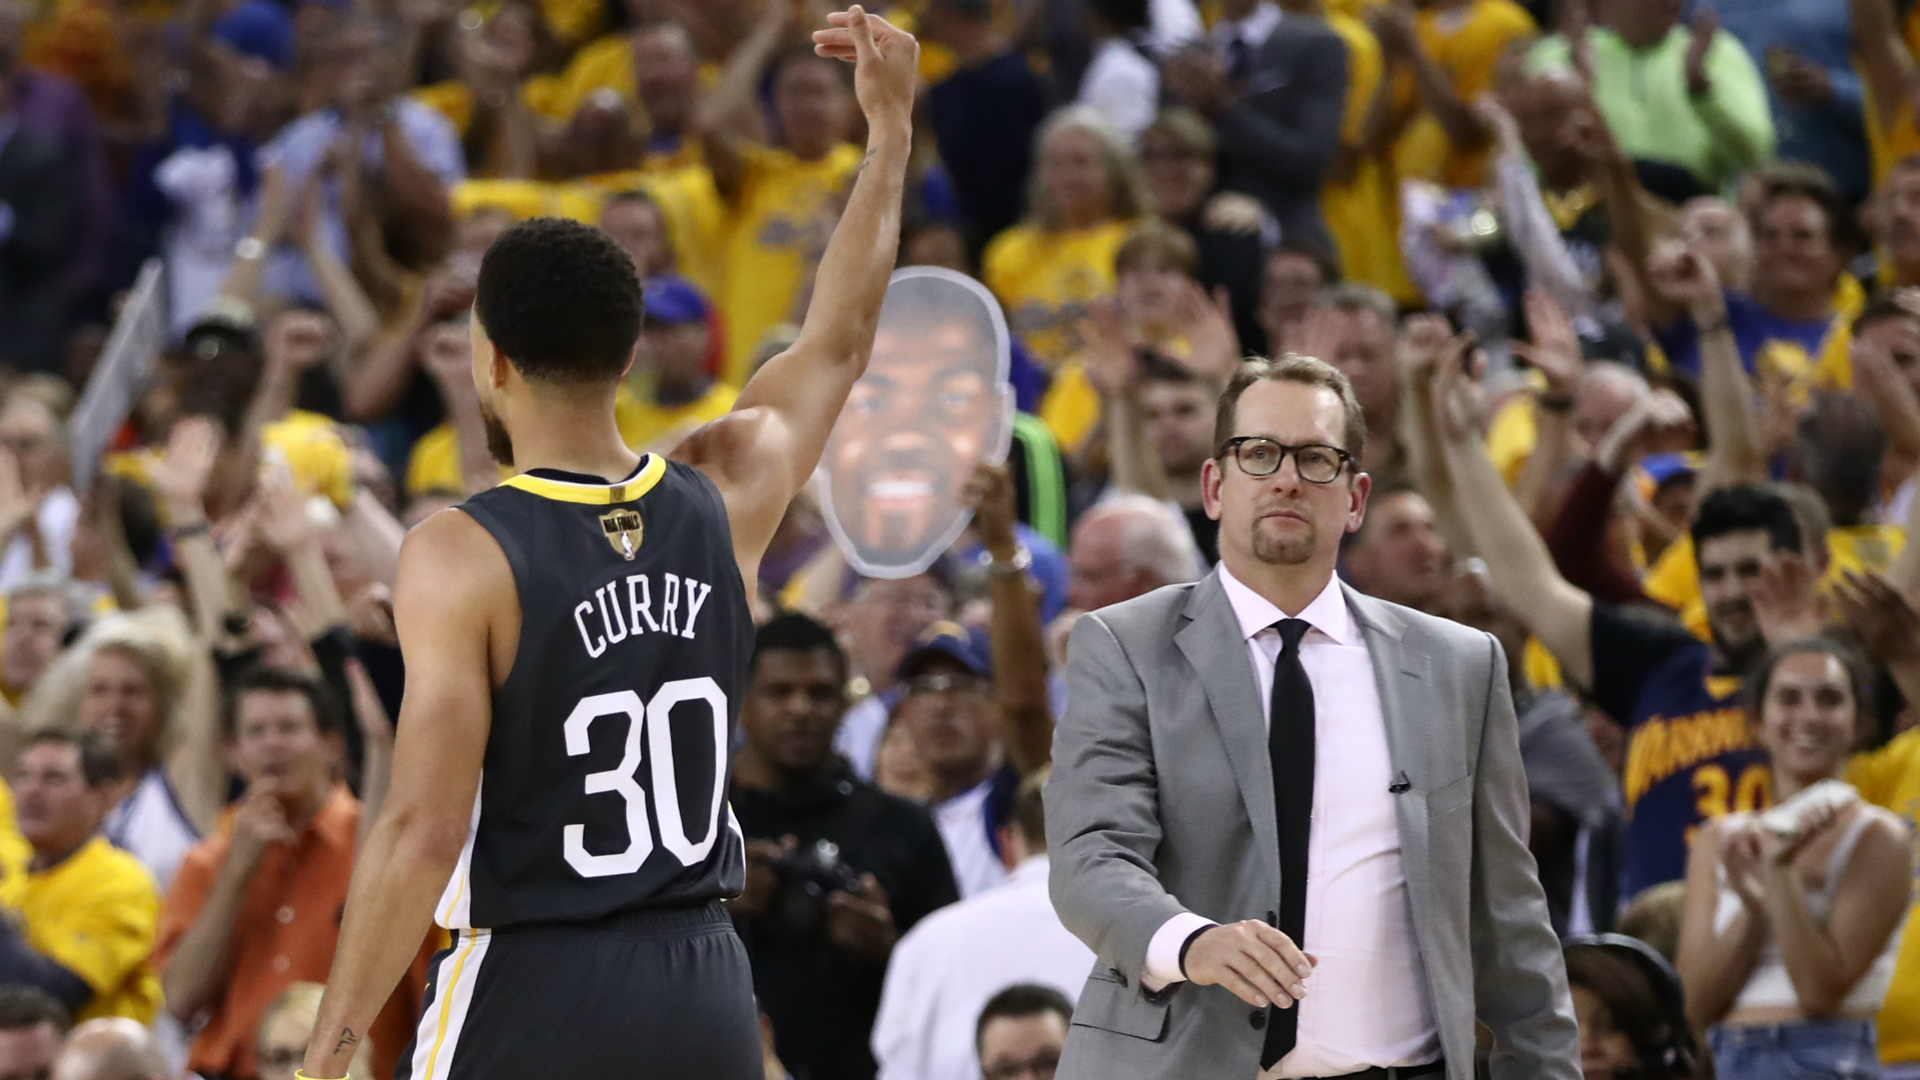 After lifting the Larry O'Brien Trophy, Nick Nurse insisted his long coaching journey at lower levels of the game never discouraged him.